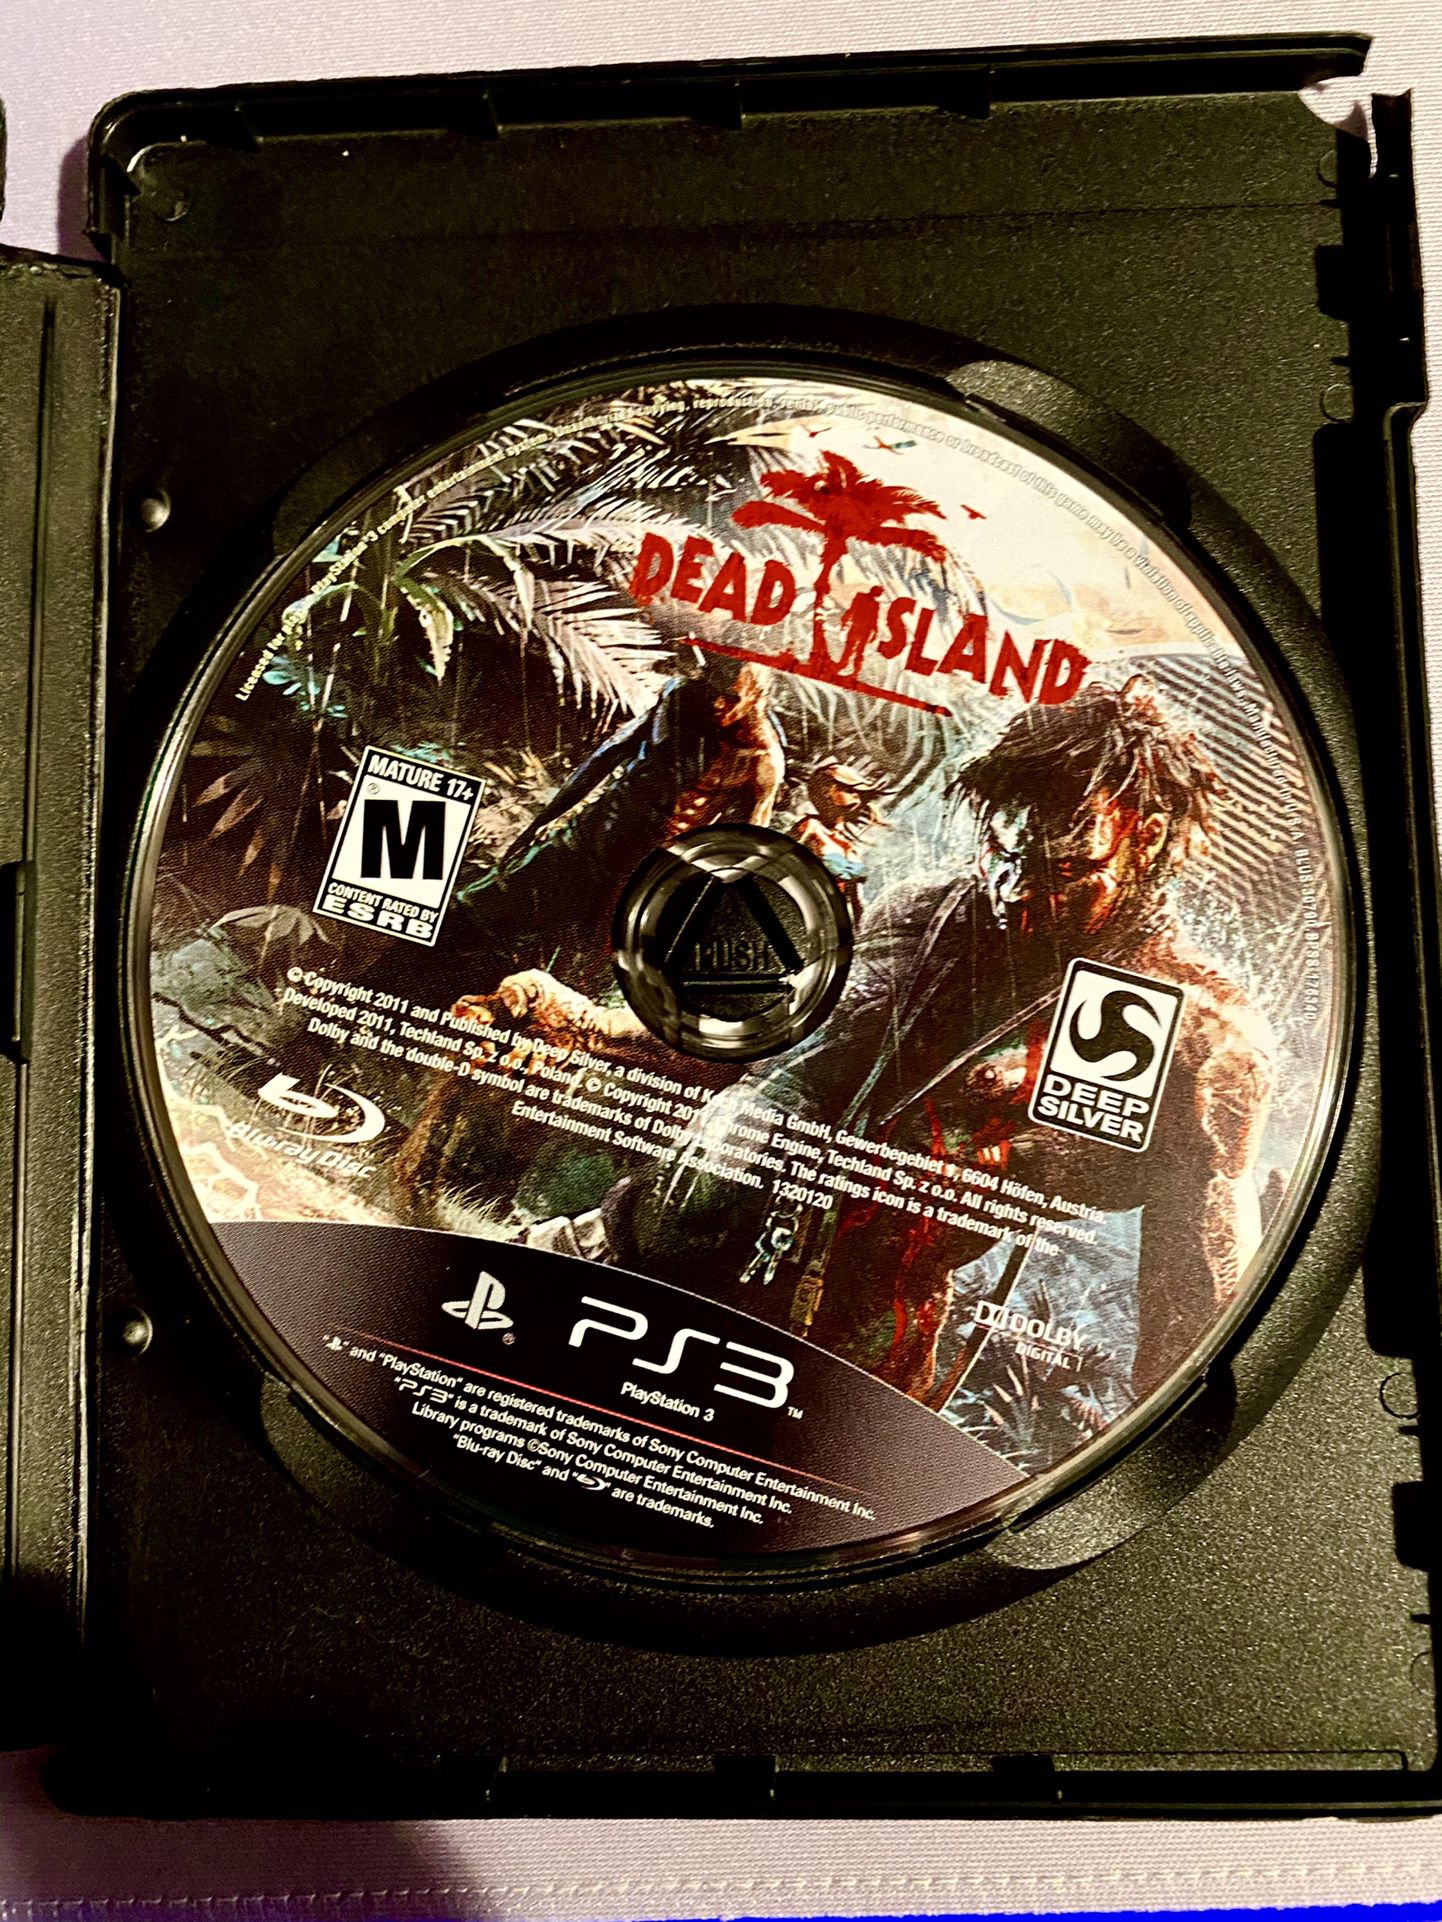 PS3 Dead Island video game for Sale in Hudson, NH - OfferUp